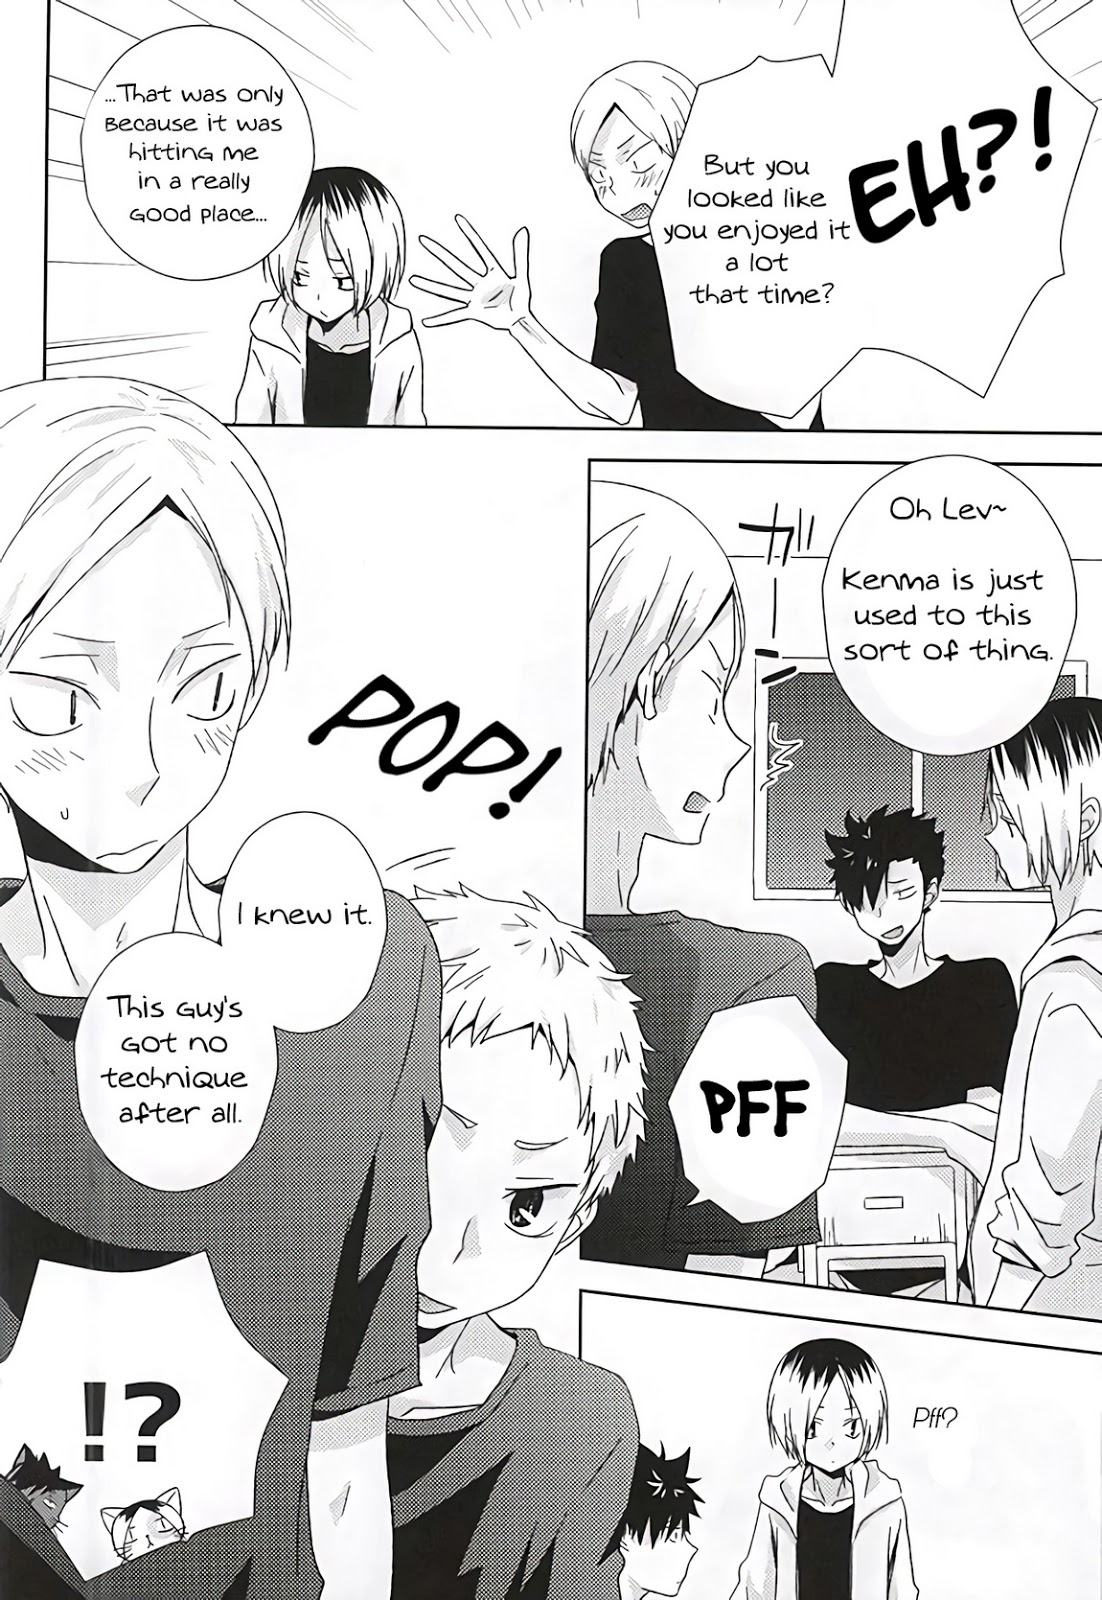 (SPARK10) [MOBRIS (Tomoharu)] HOWtoPLAY tutrial (Haikyuu!!) [English] [Homies over Hoes] page 3 full